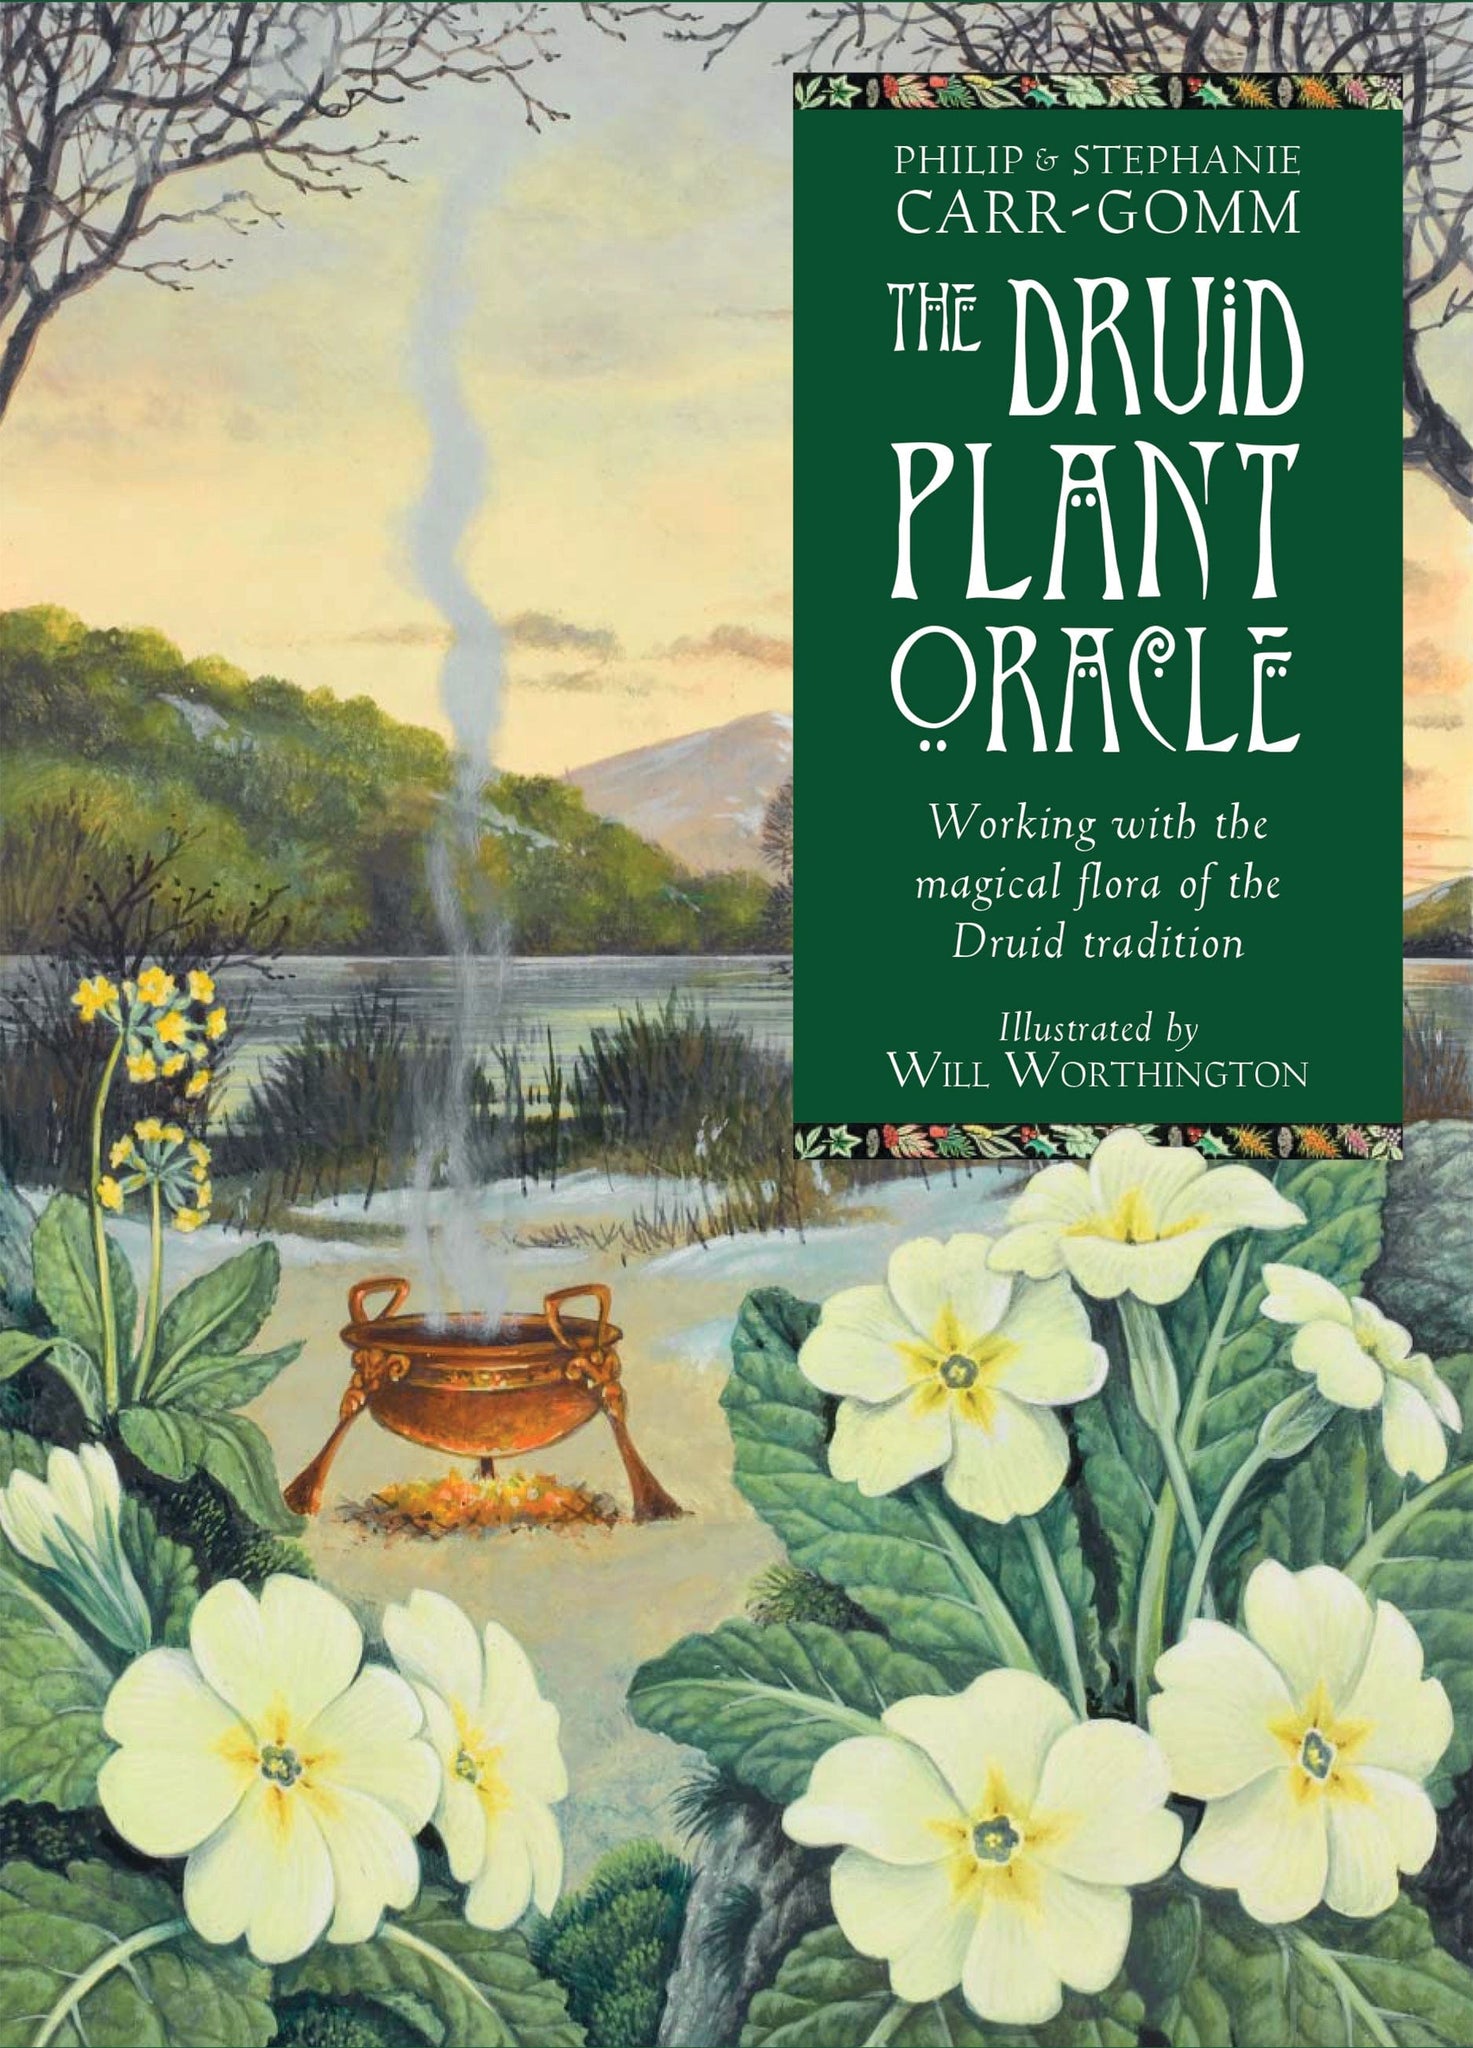 The Druid Plant Oracle - Working with the Magical Flora of the Druid Tradition by Stephanie and Phillip Carr-Gomm